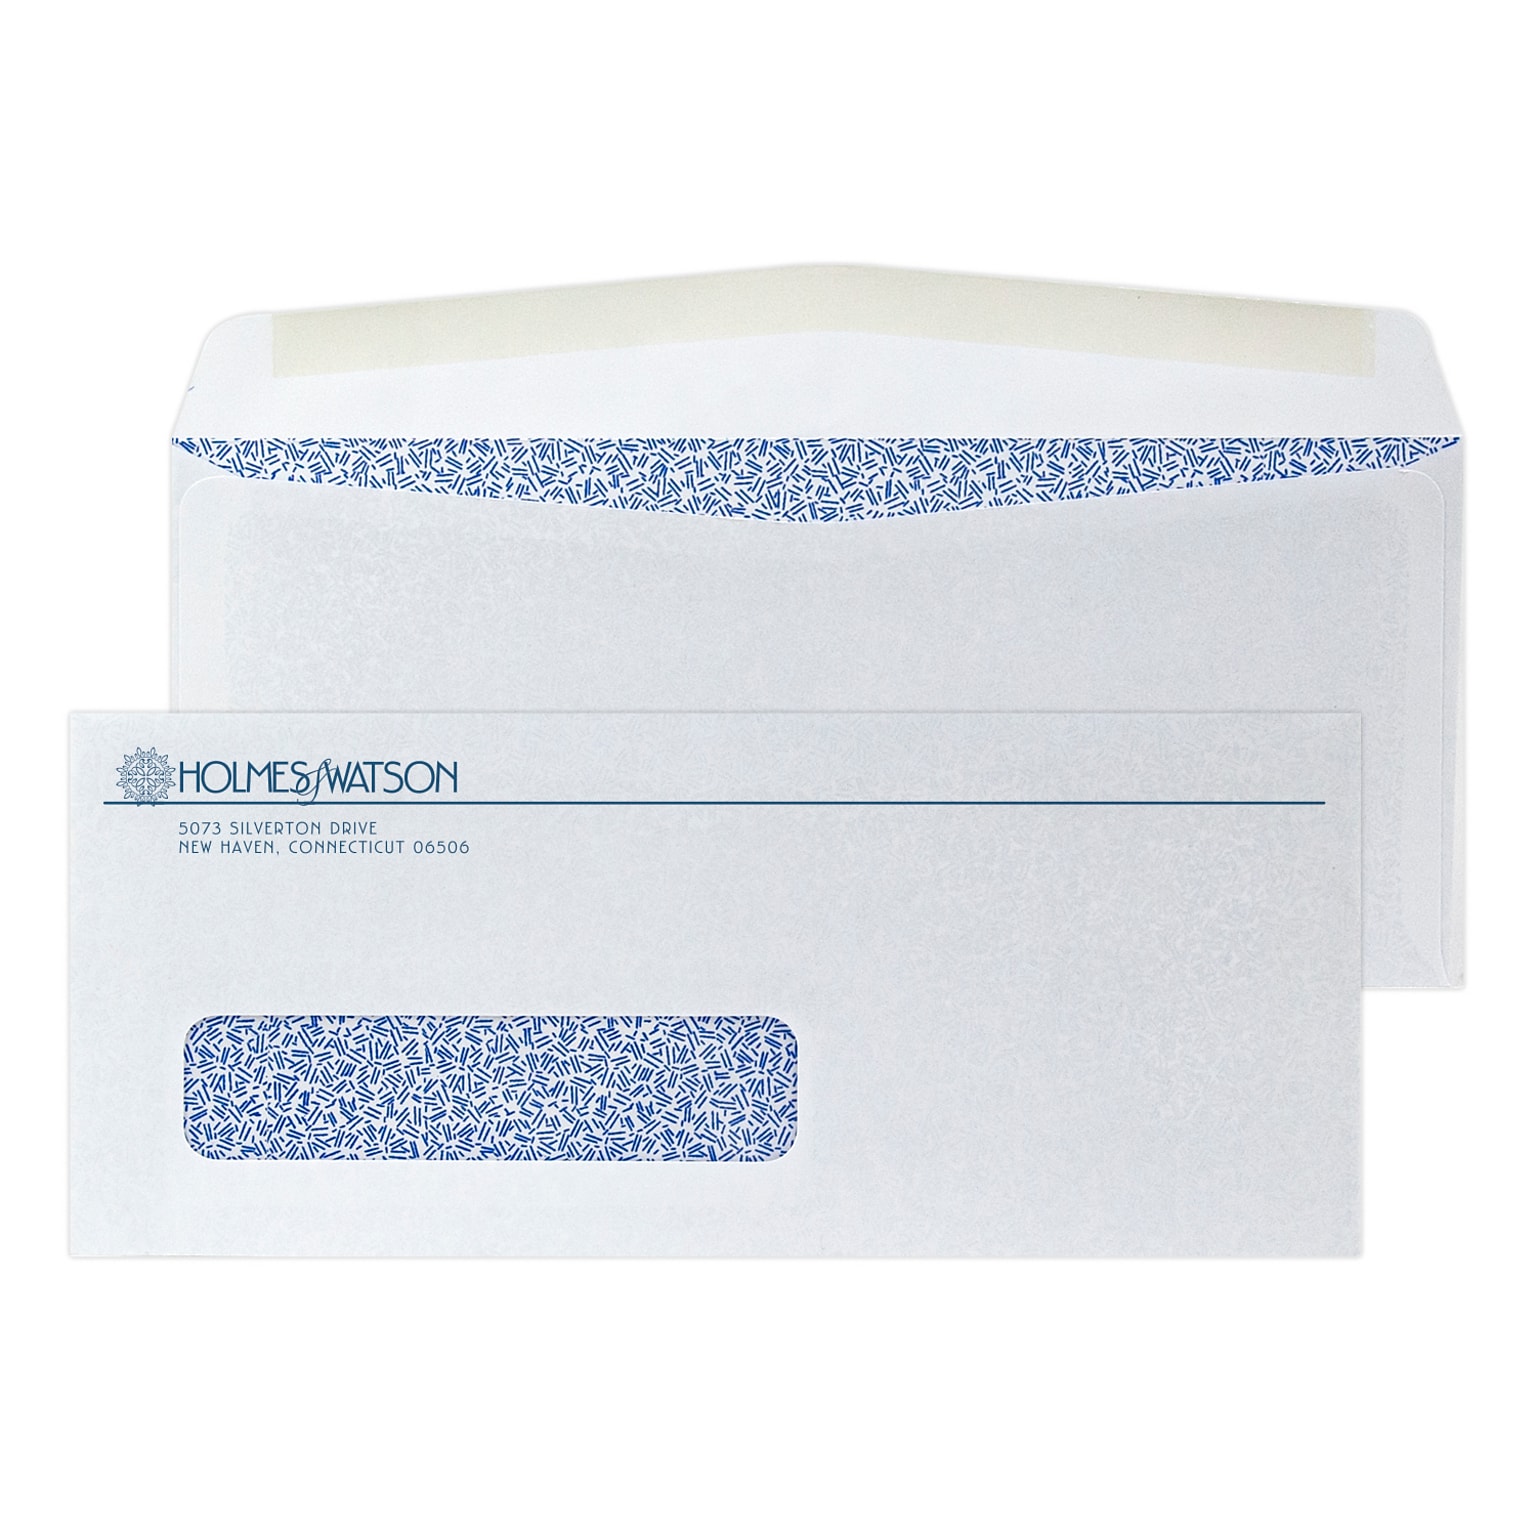 Custom #10 Window Envelopes with Security Tint, 4 1/4 x 9 1/2, 24# White Wove, 1 Custom Ink, 250 / Pack